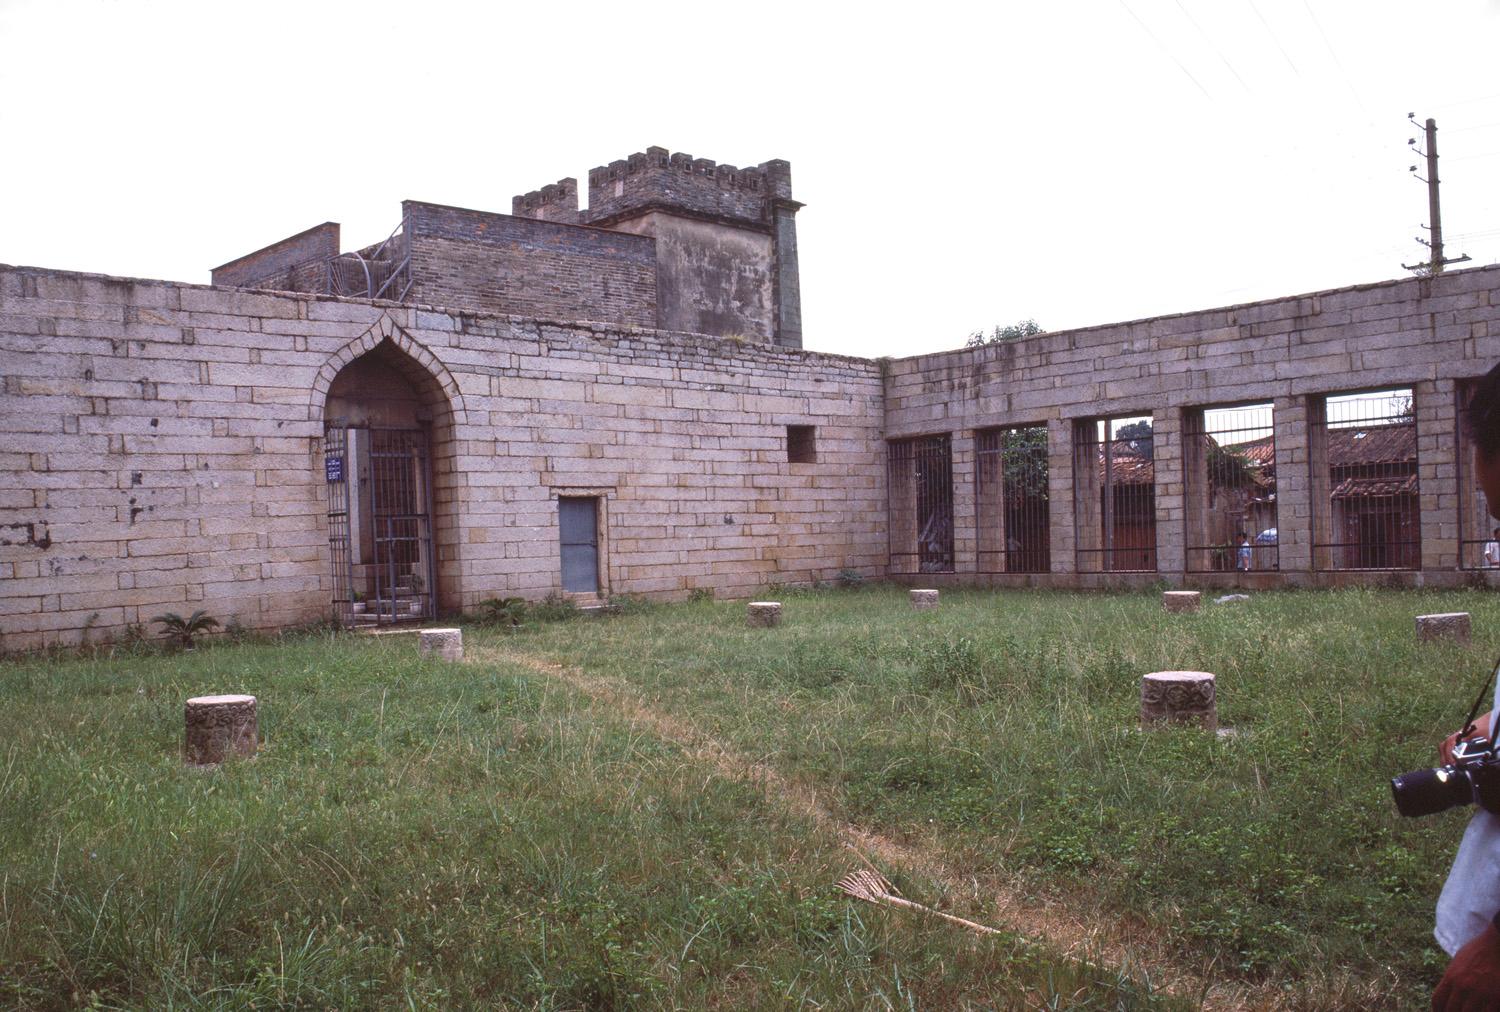 View of southeast corner of prayer hall, with the arched entrance seen on the left